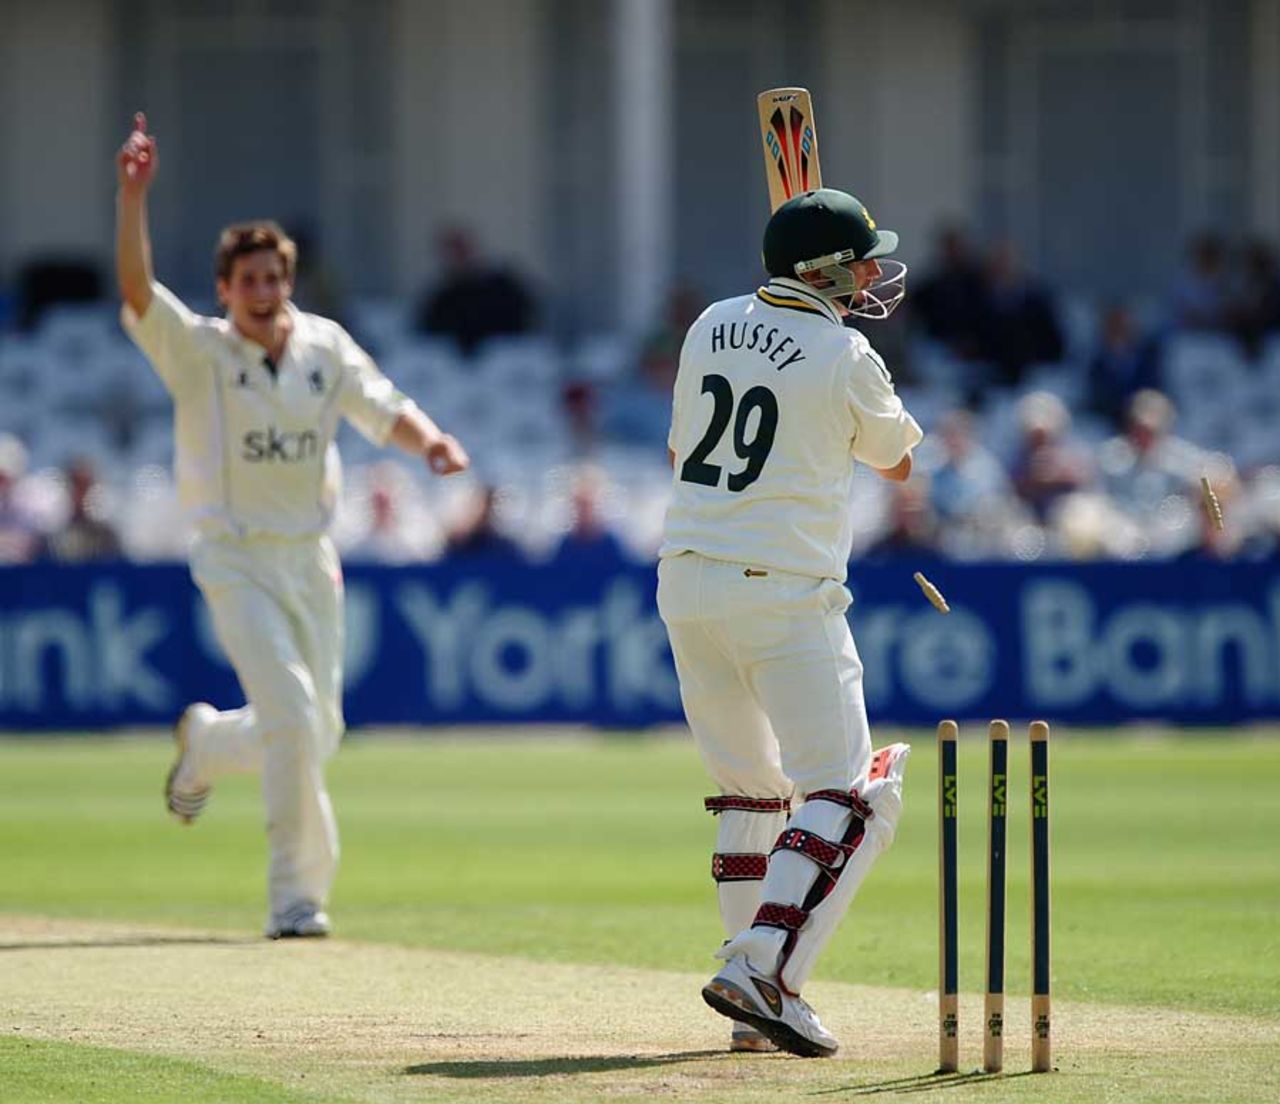 David Hussey was bowled by Chris Woakes for 32, Nottinghamshire v Warwickshire, County Championship, Division One, Trent Bridge, August 16, 2010